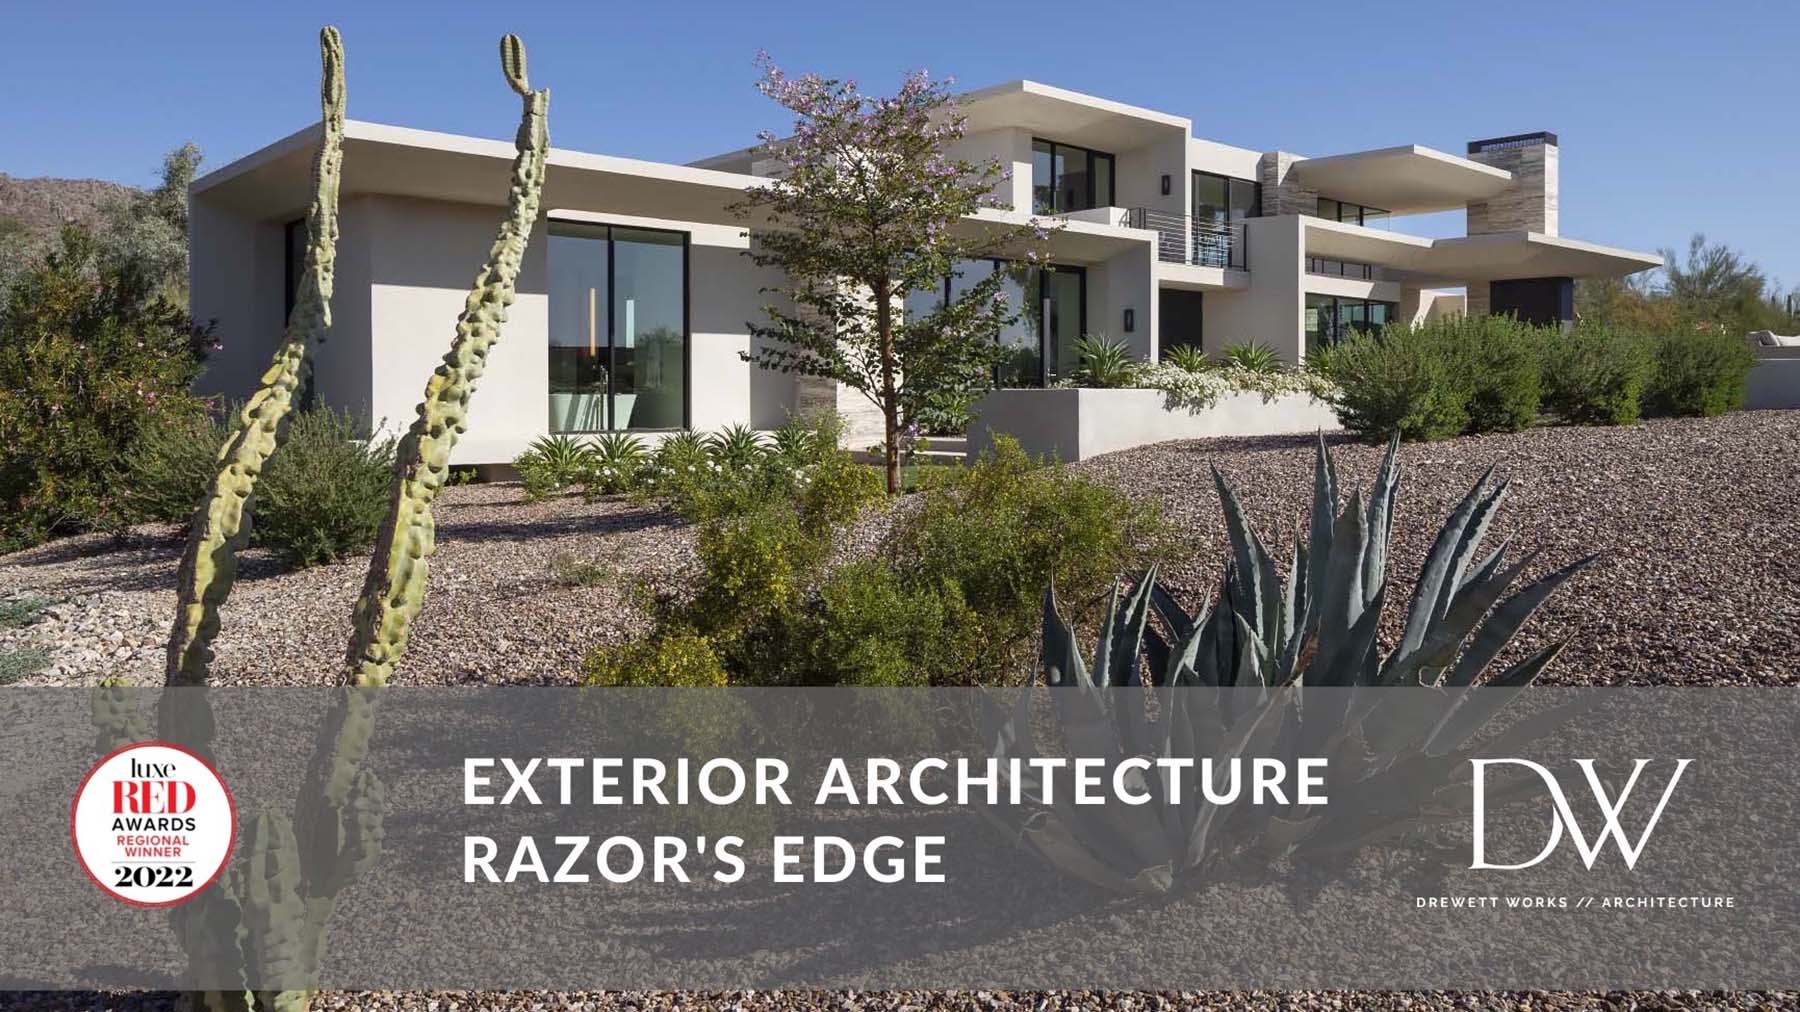 Luxe Red Awards 2022 Feature 1 Located in Scottsdale Ariz Drewett Works is an award winning architecture firm specializing in luxury residential hospitality and commercial architecture